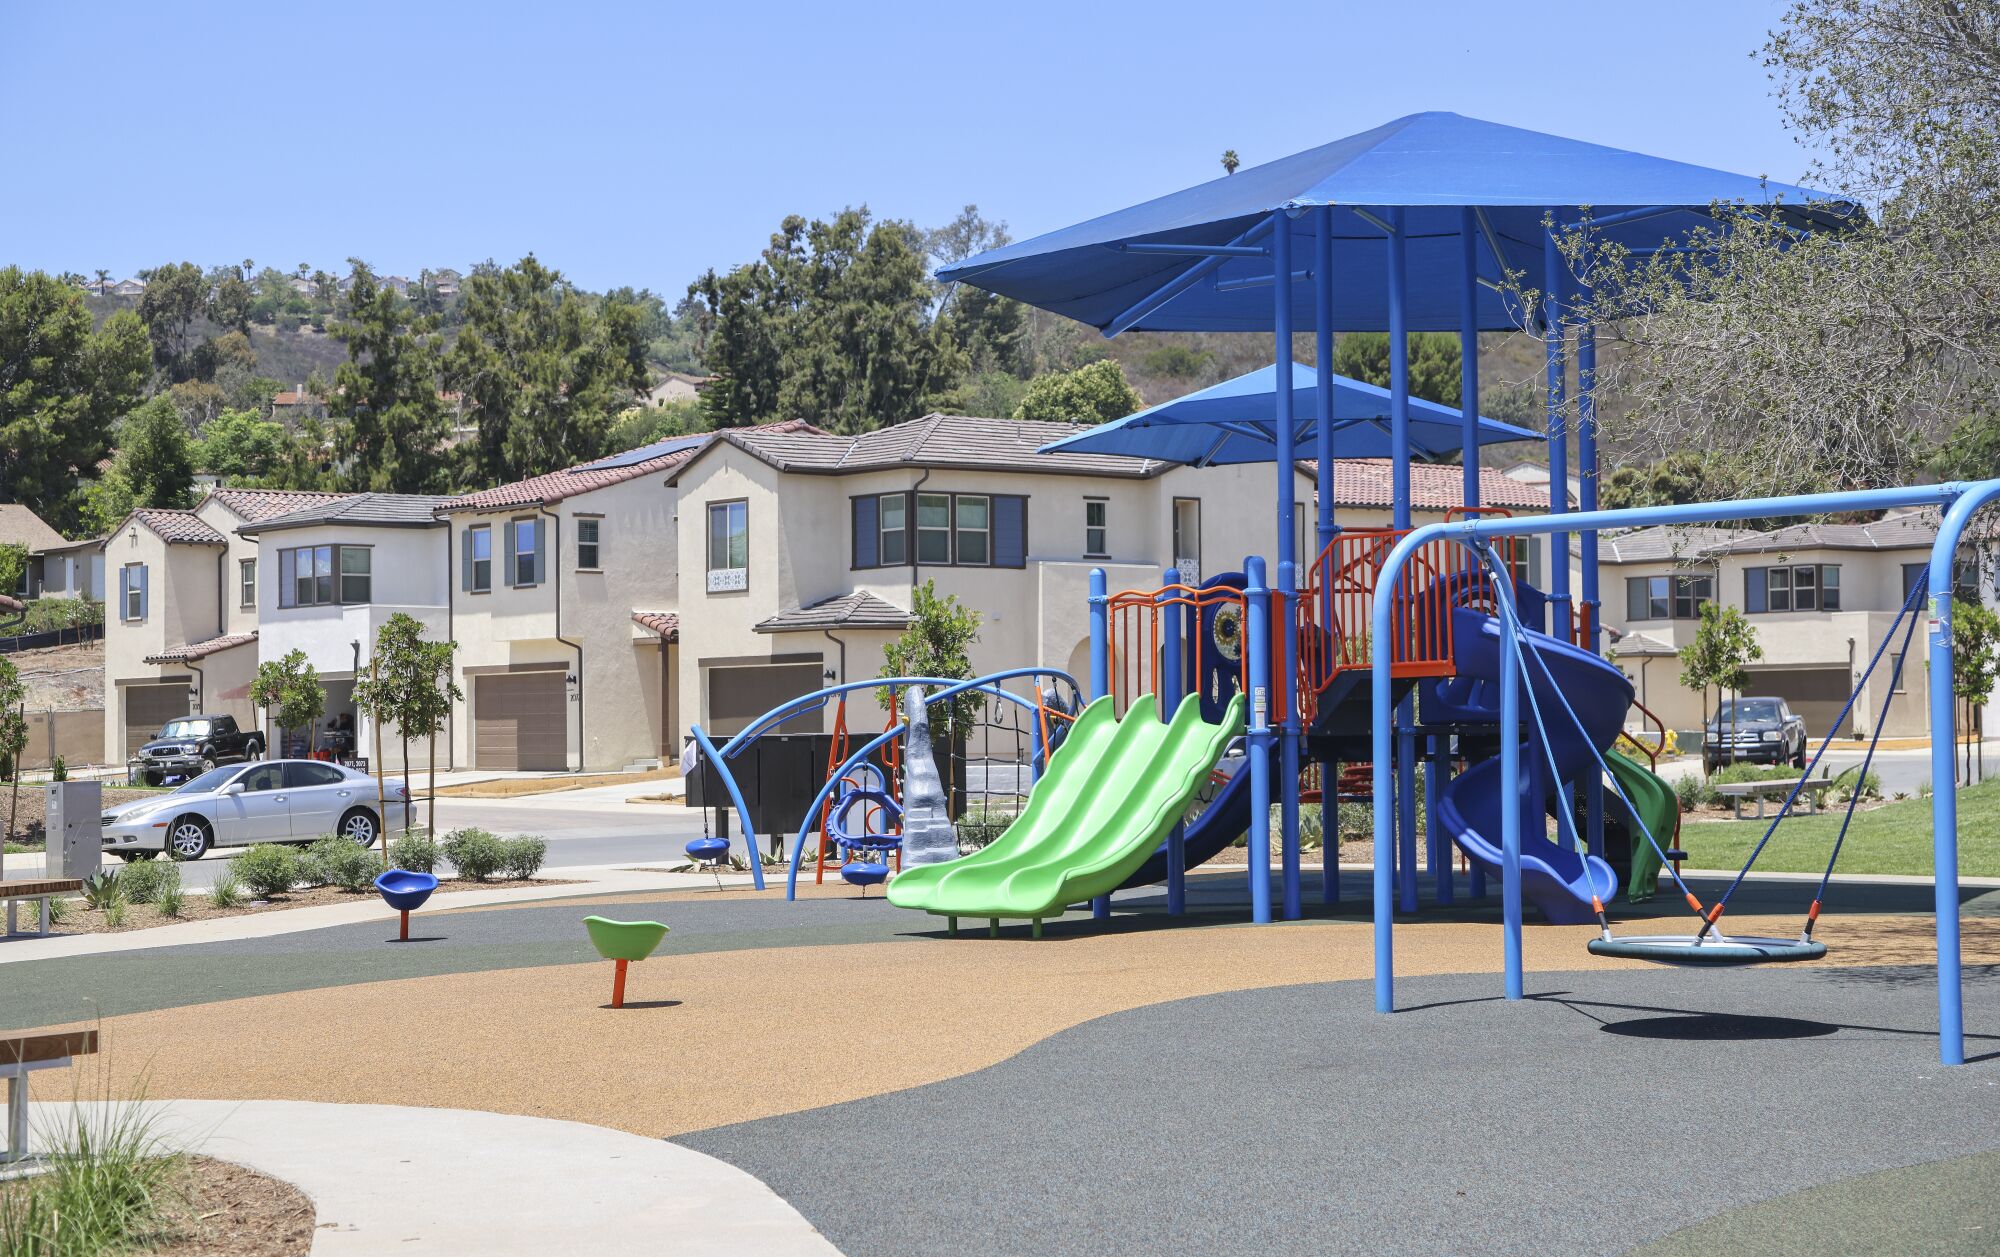 These are play structures at Siesta Park at the Canopy Grove housing development on Tuesday, July 20, 2021 in Escondido, CA. 